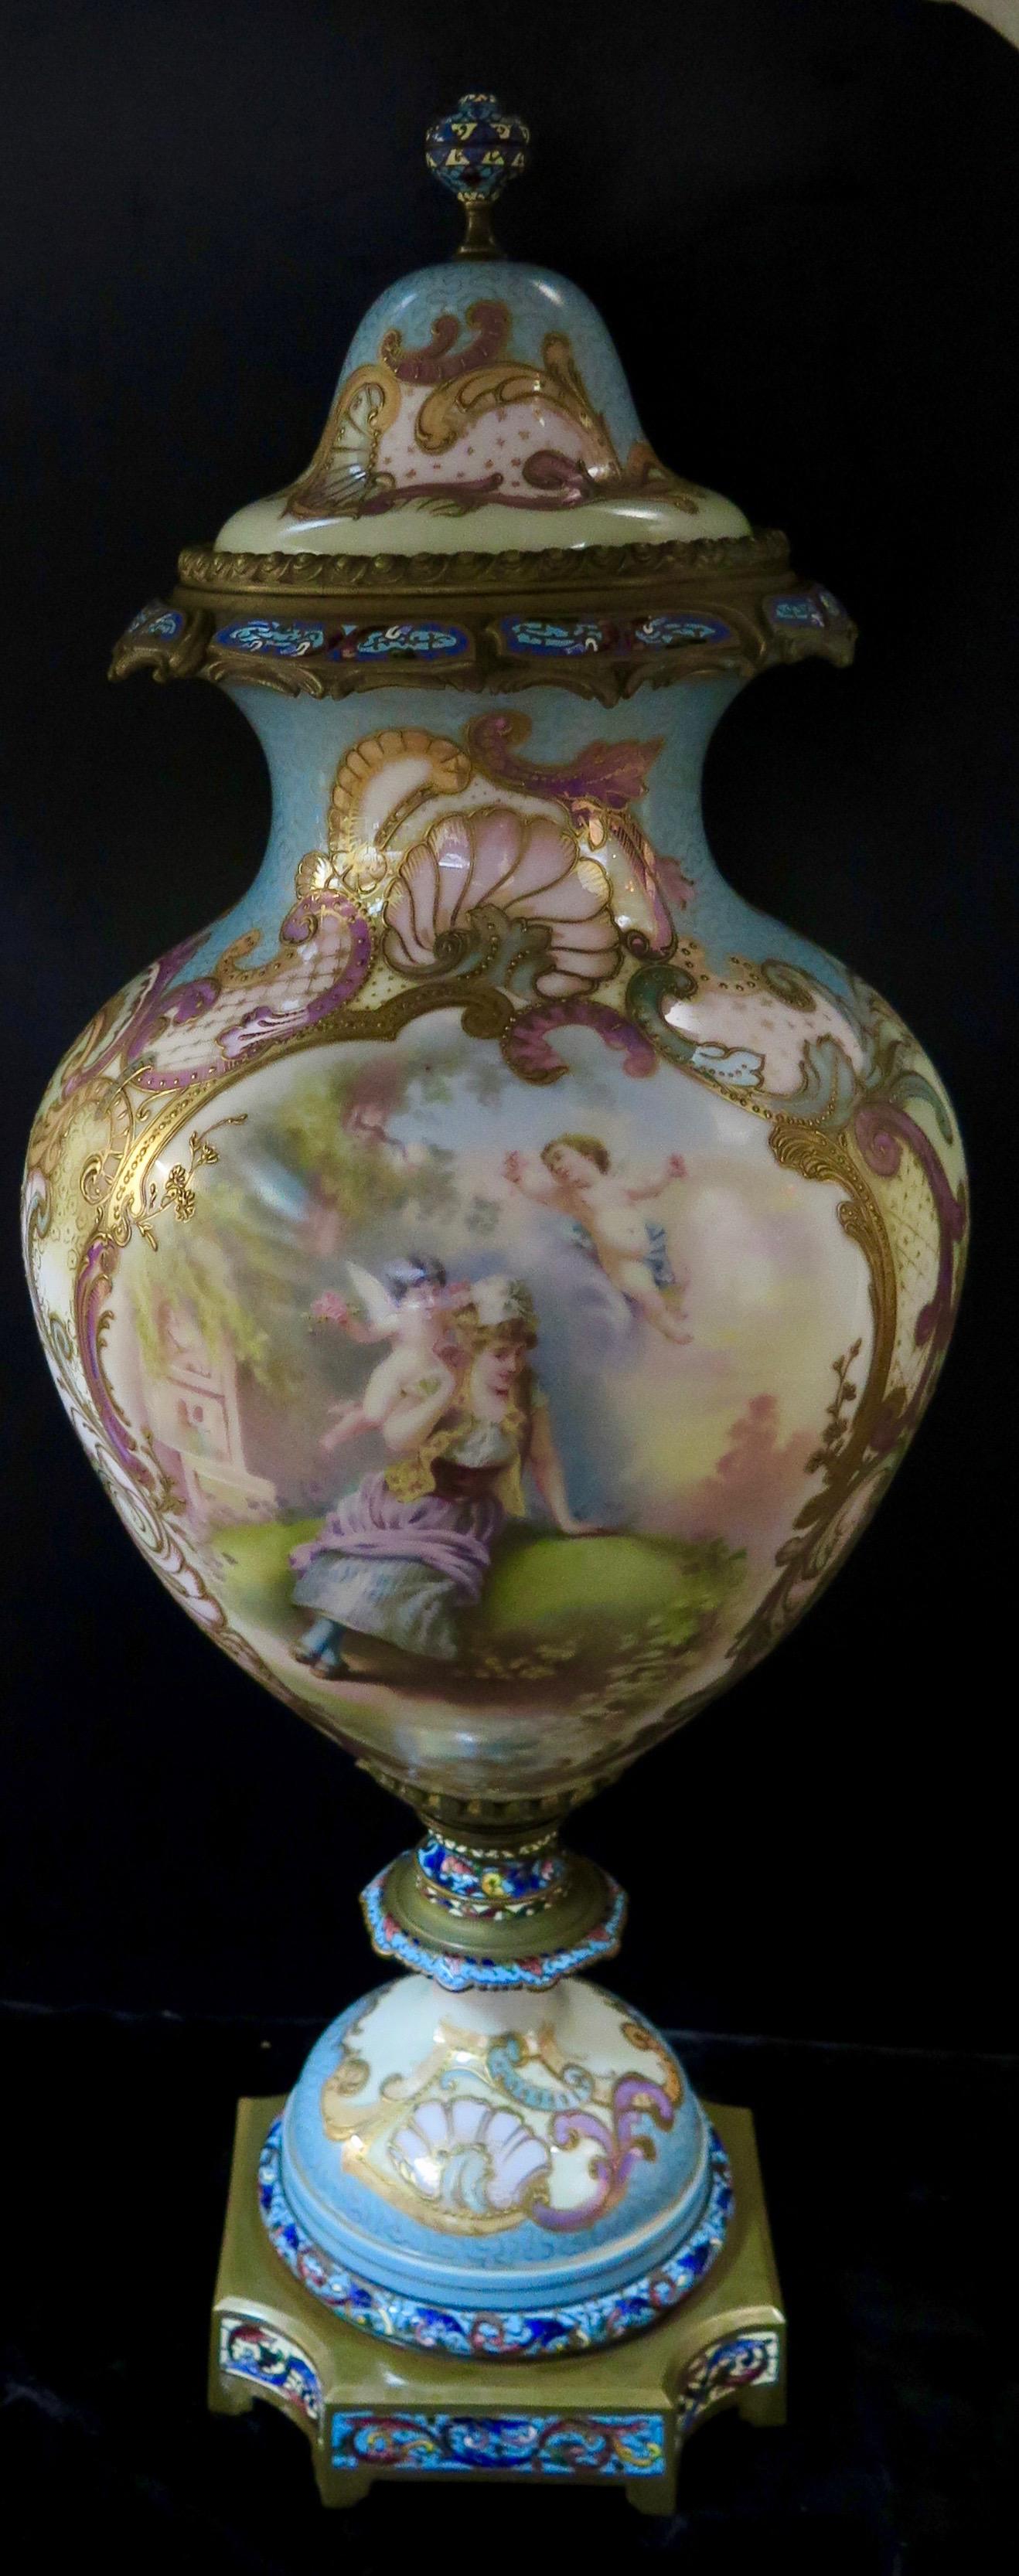 This vintage antique hand painted porcelain palace size urn dates from the late 19th century. The baluster shape urn & lid are elaborately decorated with a scrolling motif highlighting a detailed scene of a young maiden in a garden with attending